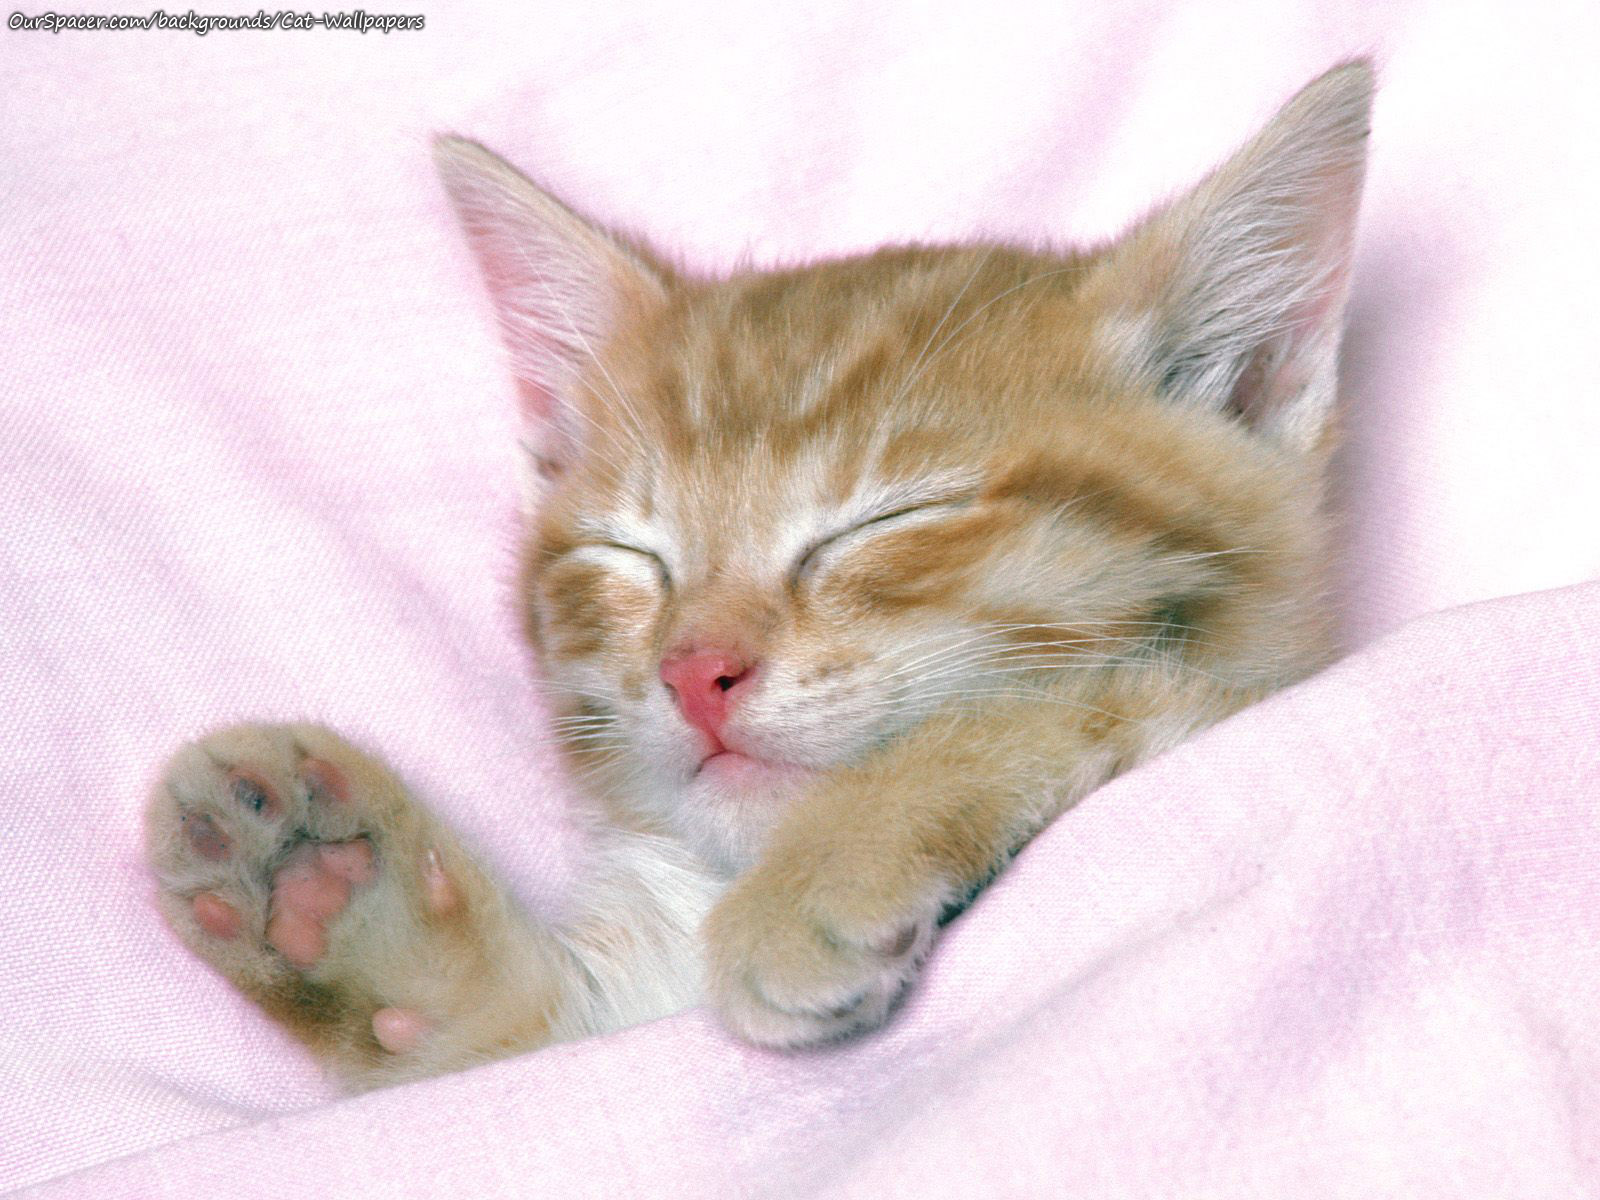 Kitten taking a nap wallpapers for myspace, twitter, and hi5 backgrounds